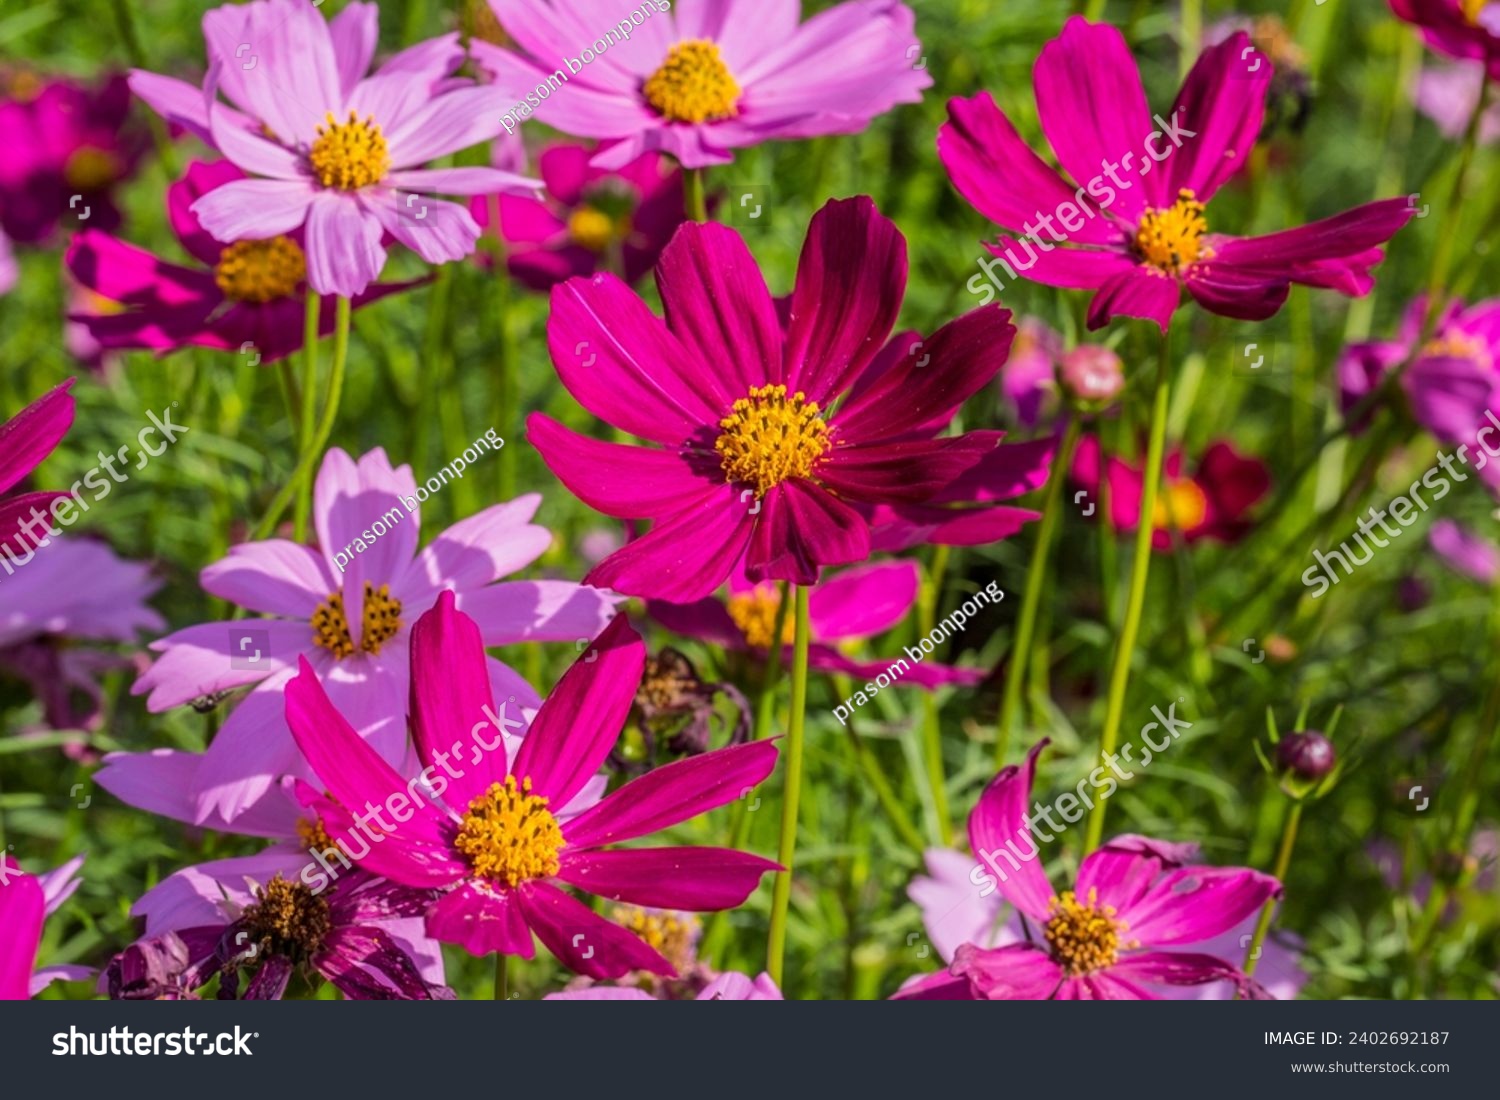 Colorful cosmos flowers blooming in the garden. #2402692187